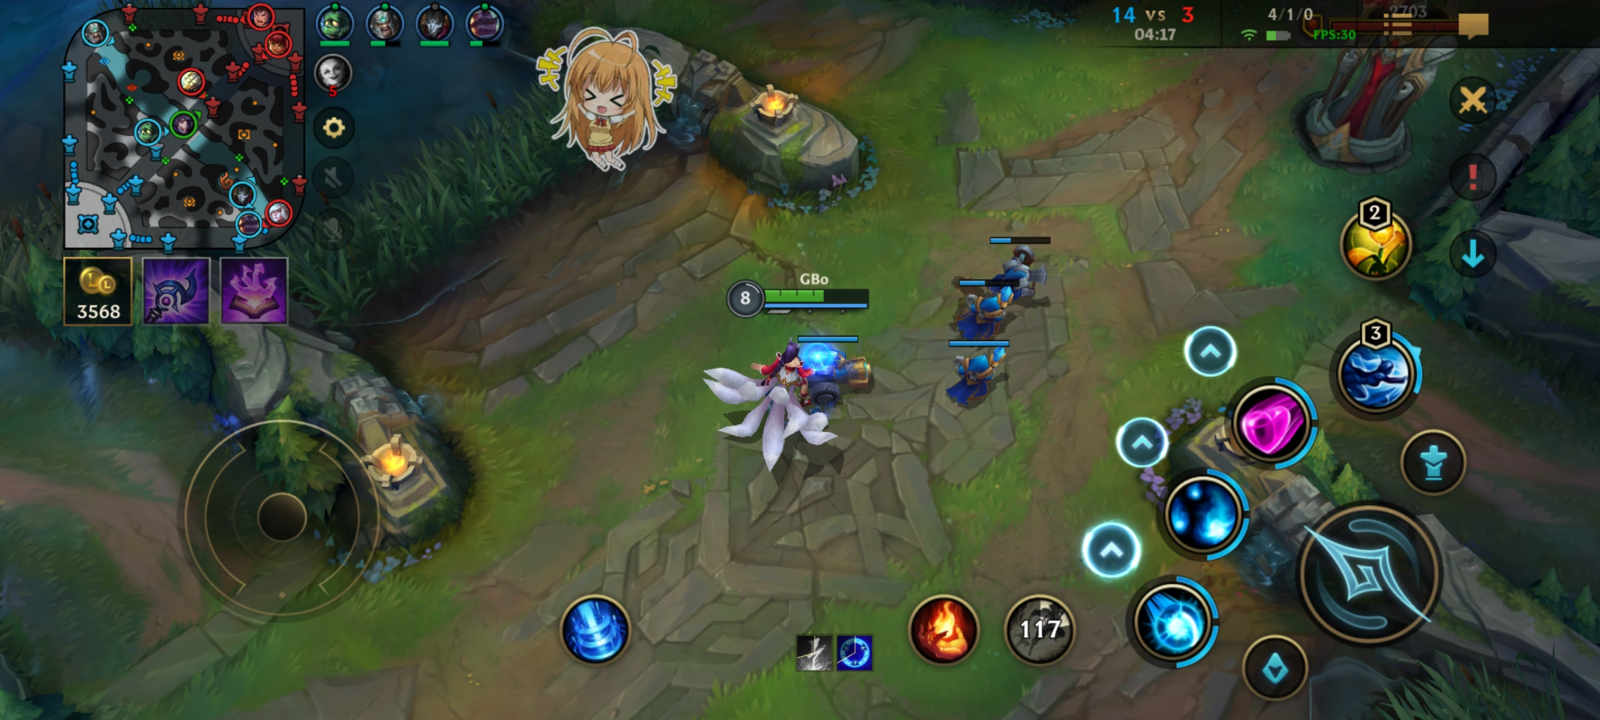 League of Legends: Wild Rift APK for Android - Download